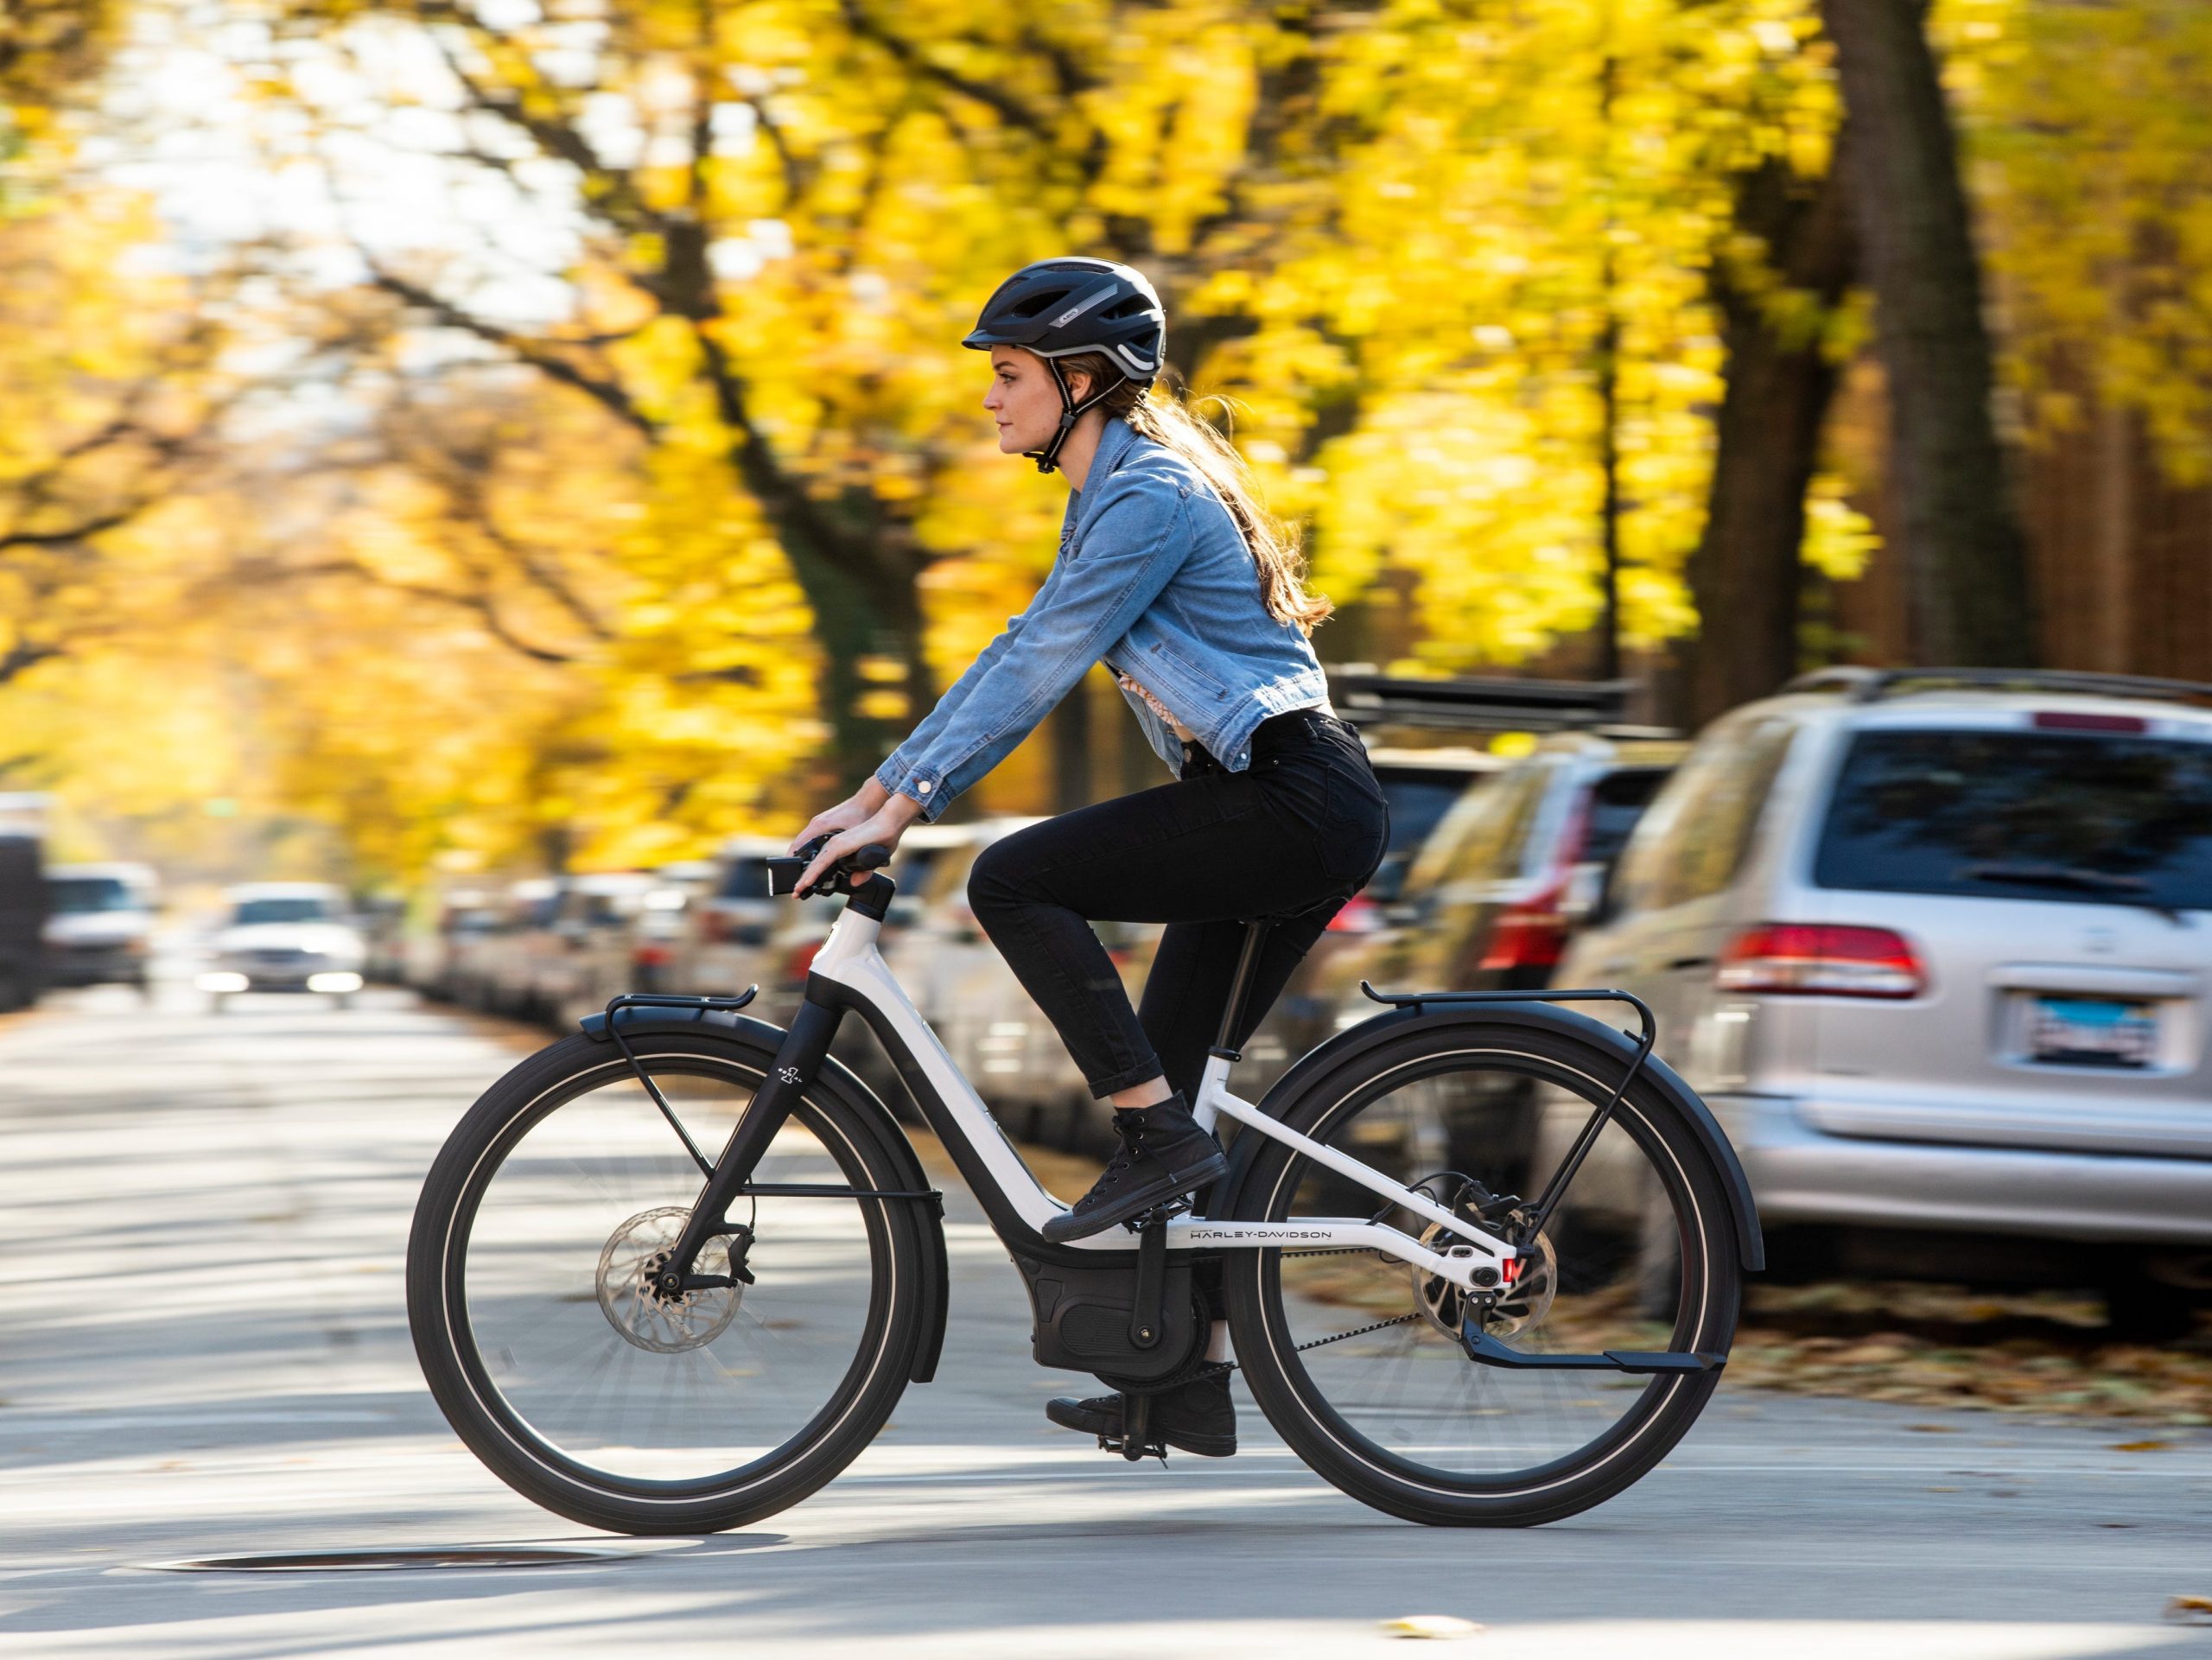 A woman wearing a bike helmet, jean jacket, black pants and boots rides a Serial 1 electric bike on a street.